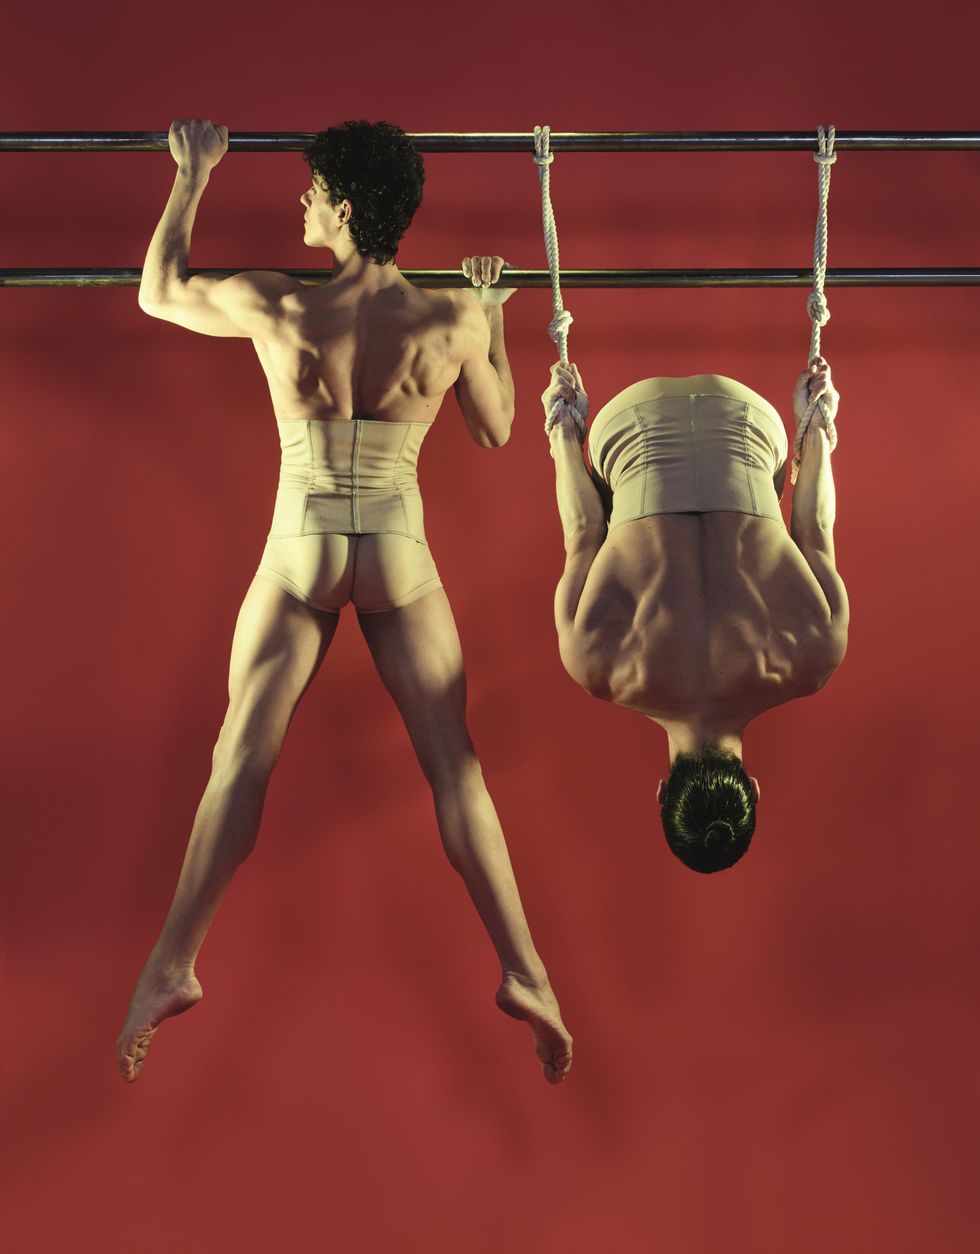 Muscle, Performance, Rope, Circus, Balance, Flesh, Performing arts, Undergarment, 